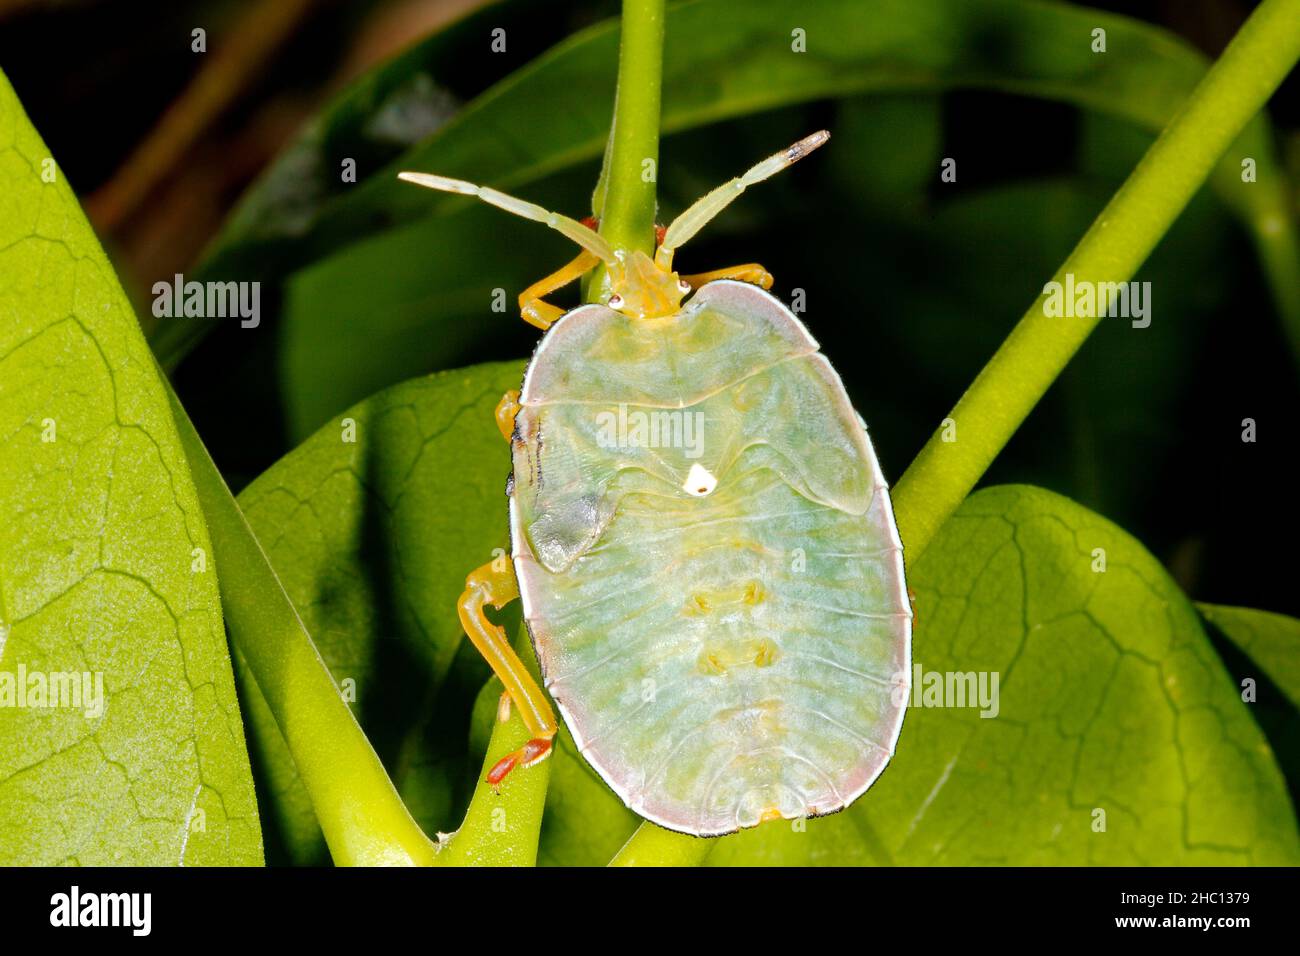 Oncomerinae Shield Bug, Rhoecus australasiae. Nymph or Instar. This true bug is a large stink bug. Coffs Harbour, NSW, Australia Stock Photo